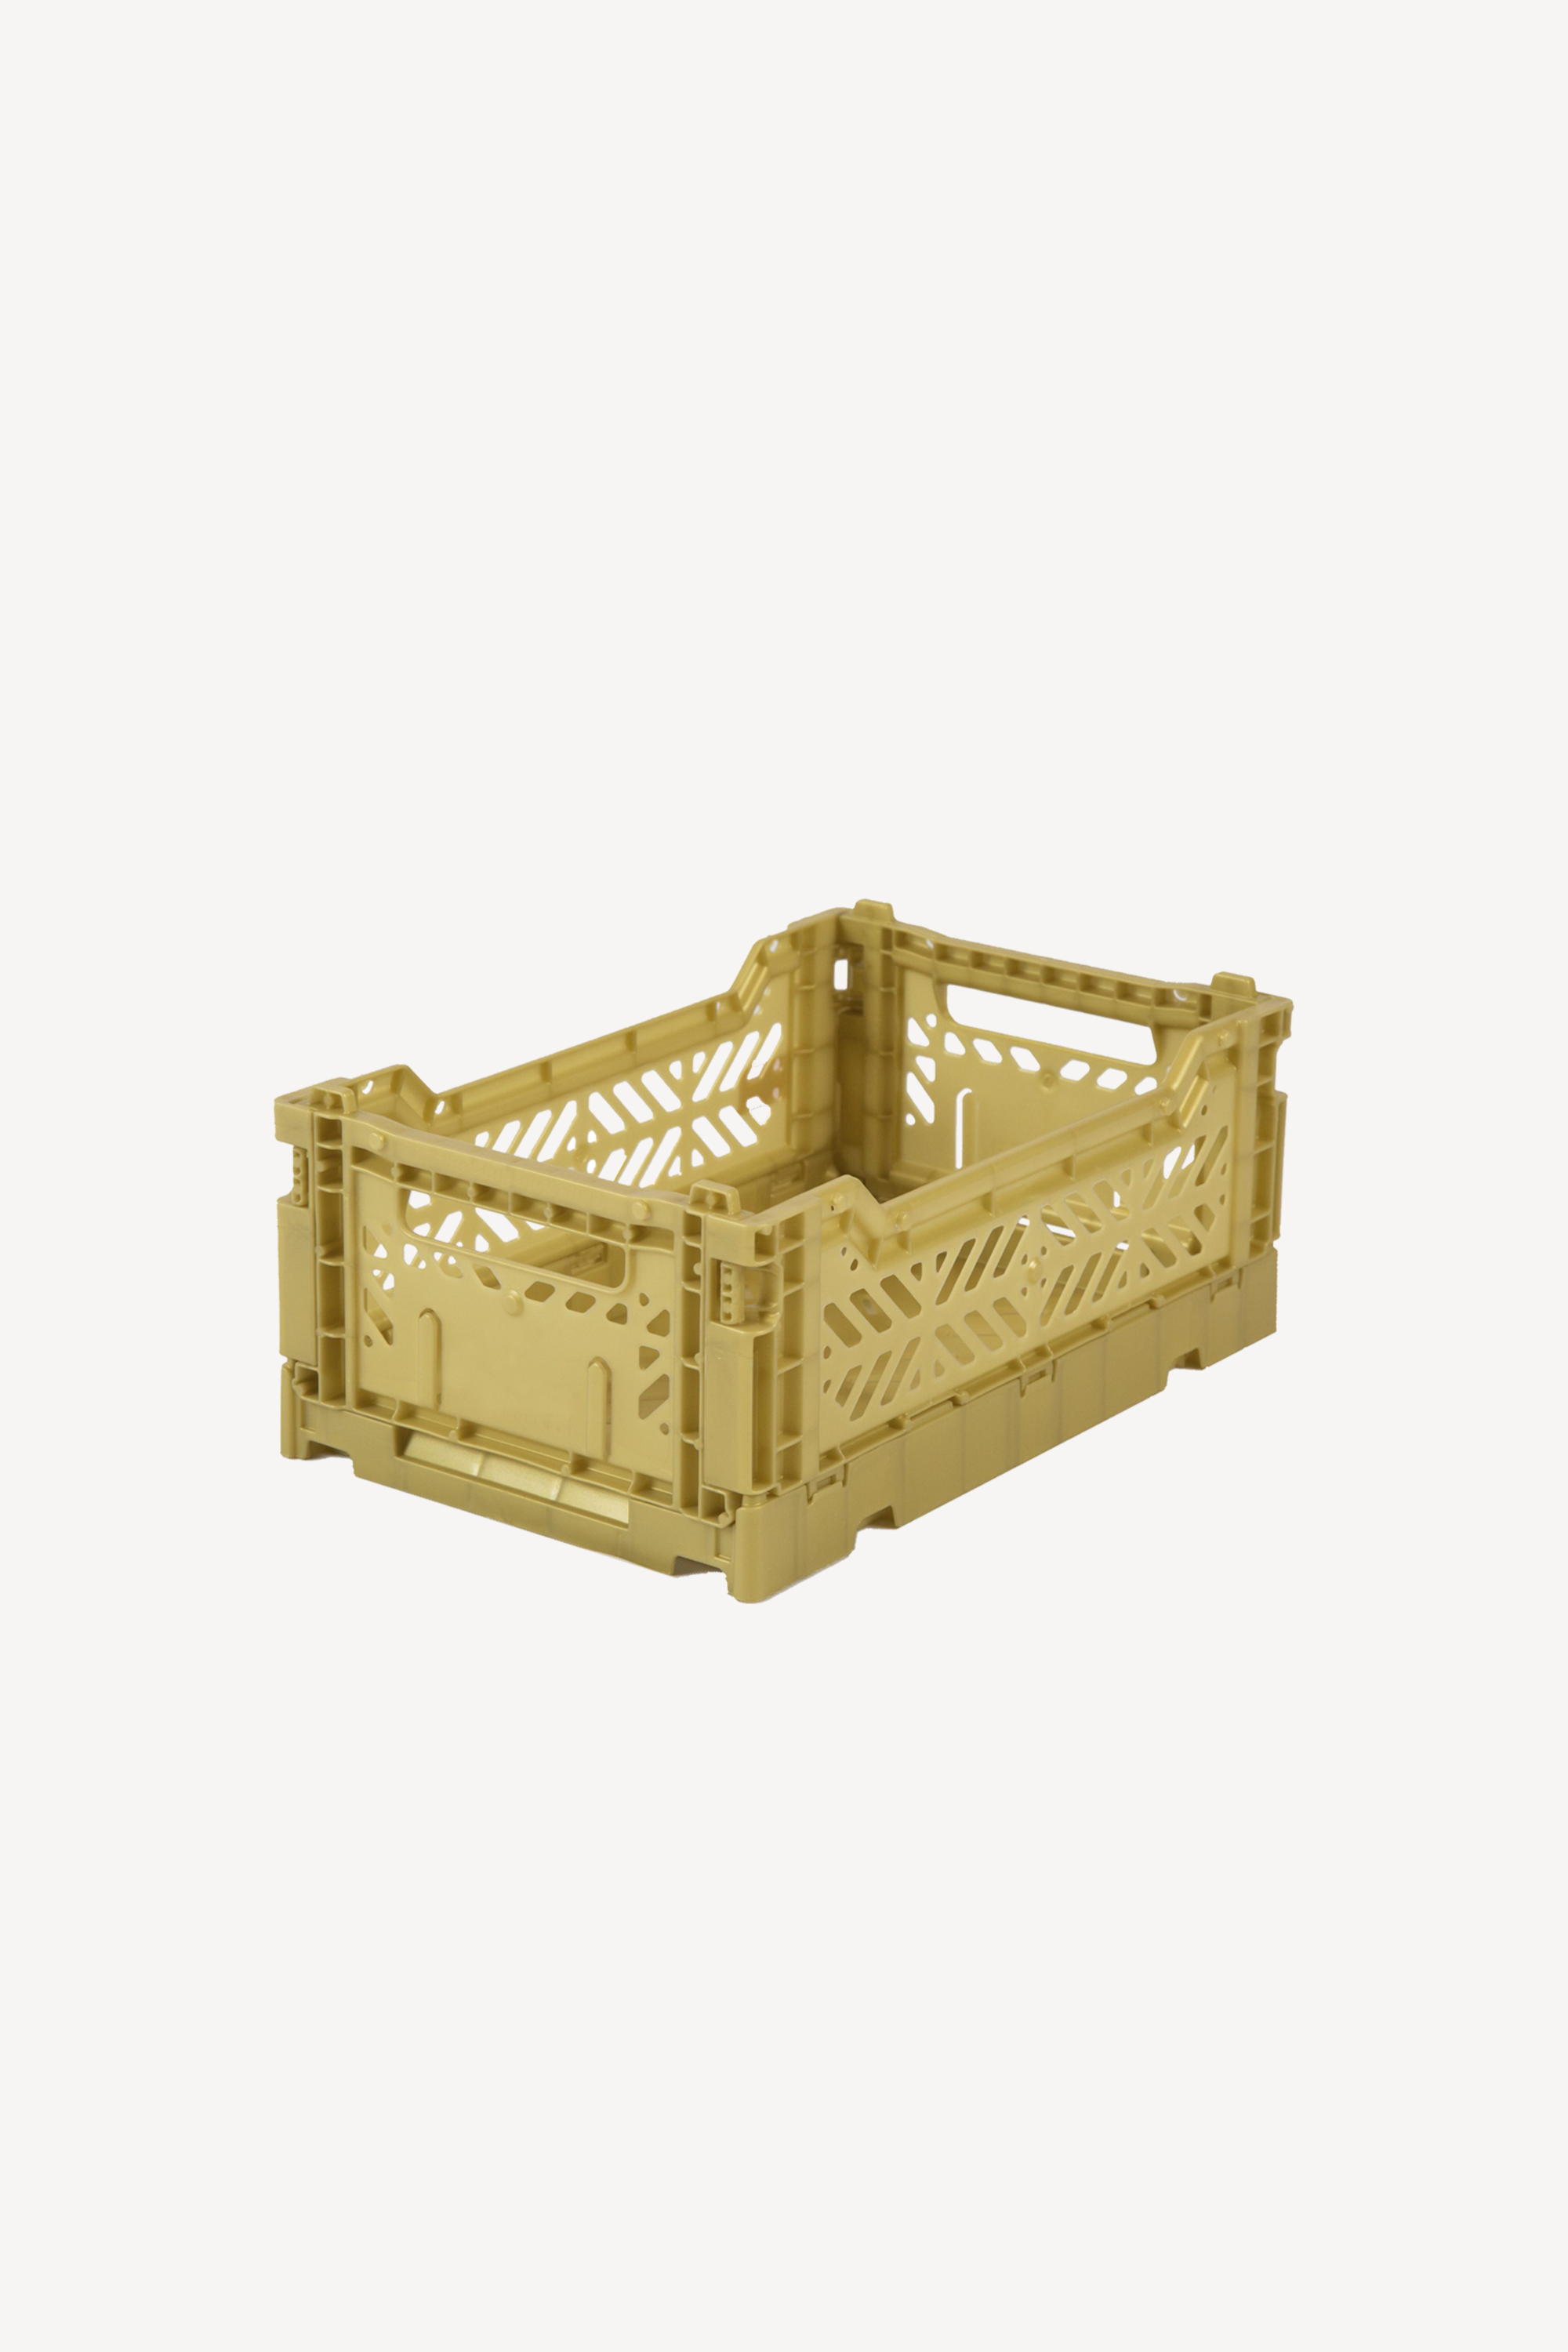 Gold Crate Small